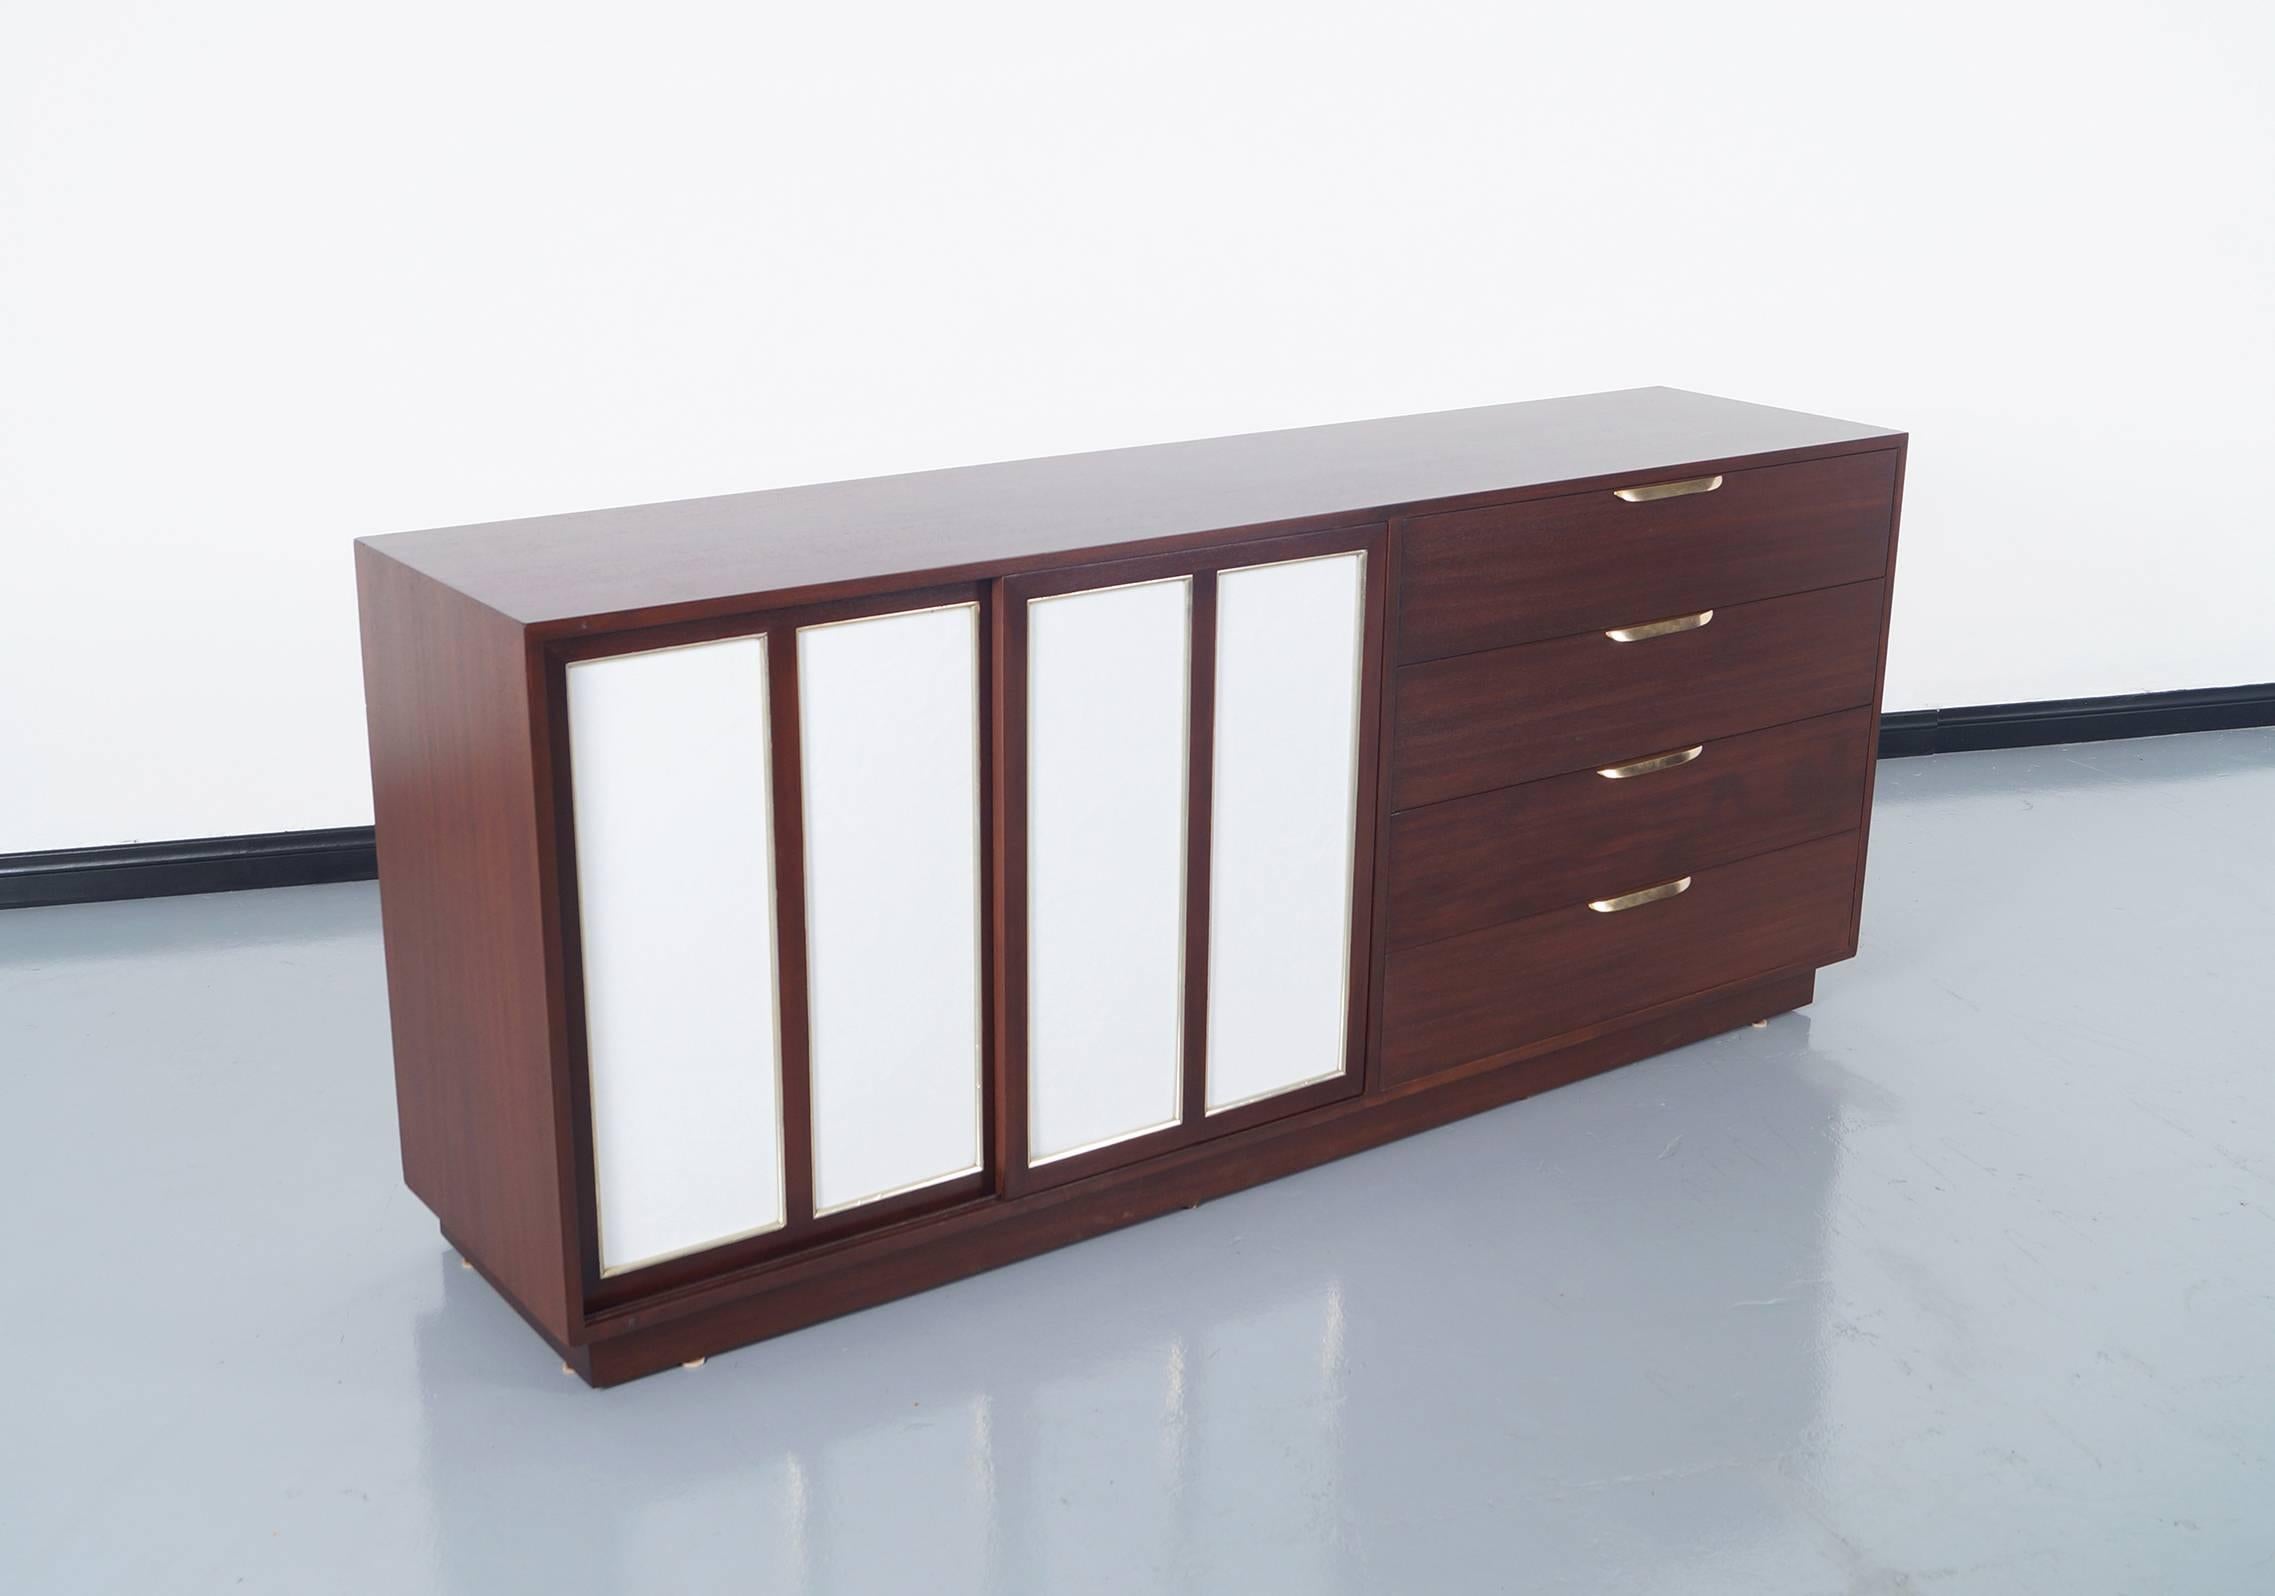 Elegant vintage modern sideboard designed by Harvey Probber in United States, circa 1960s. Features two sliding doors with inset leather on the left side. When opening the sliding doors, we can see a total of eight interior white lacquer drawers,